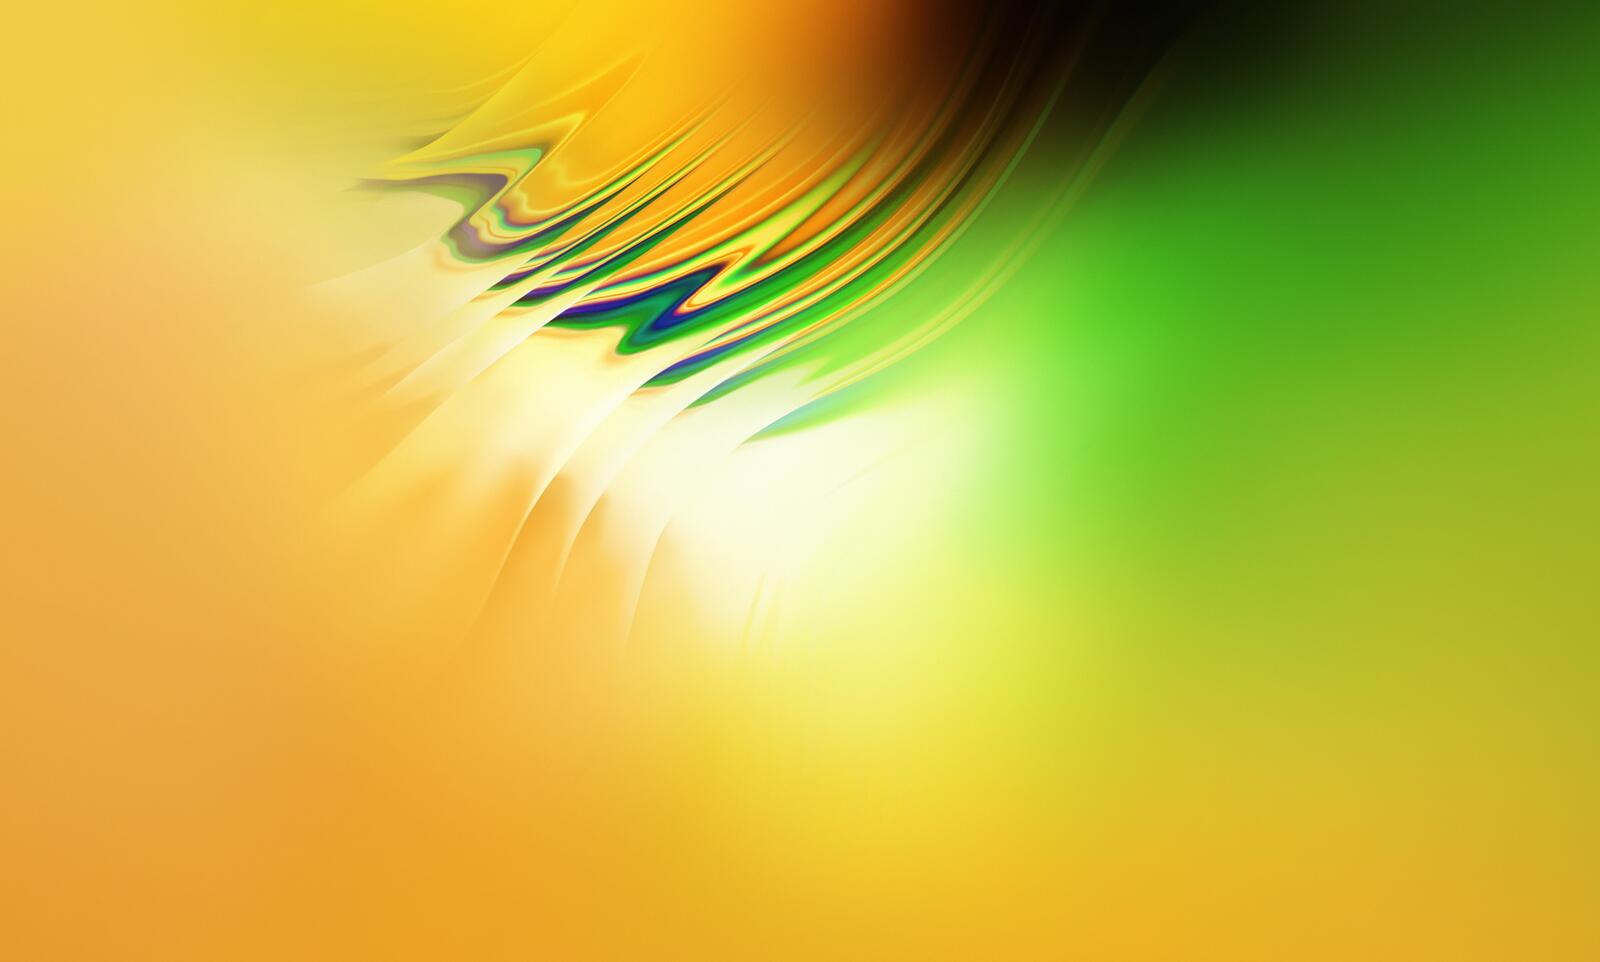 Wallpapers wavy abstraction multi-colored background orange on the desktop